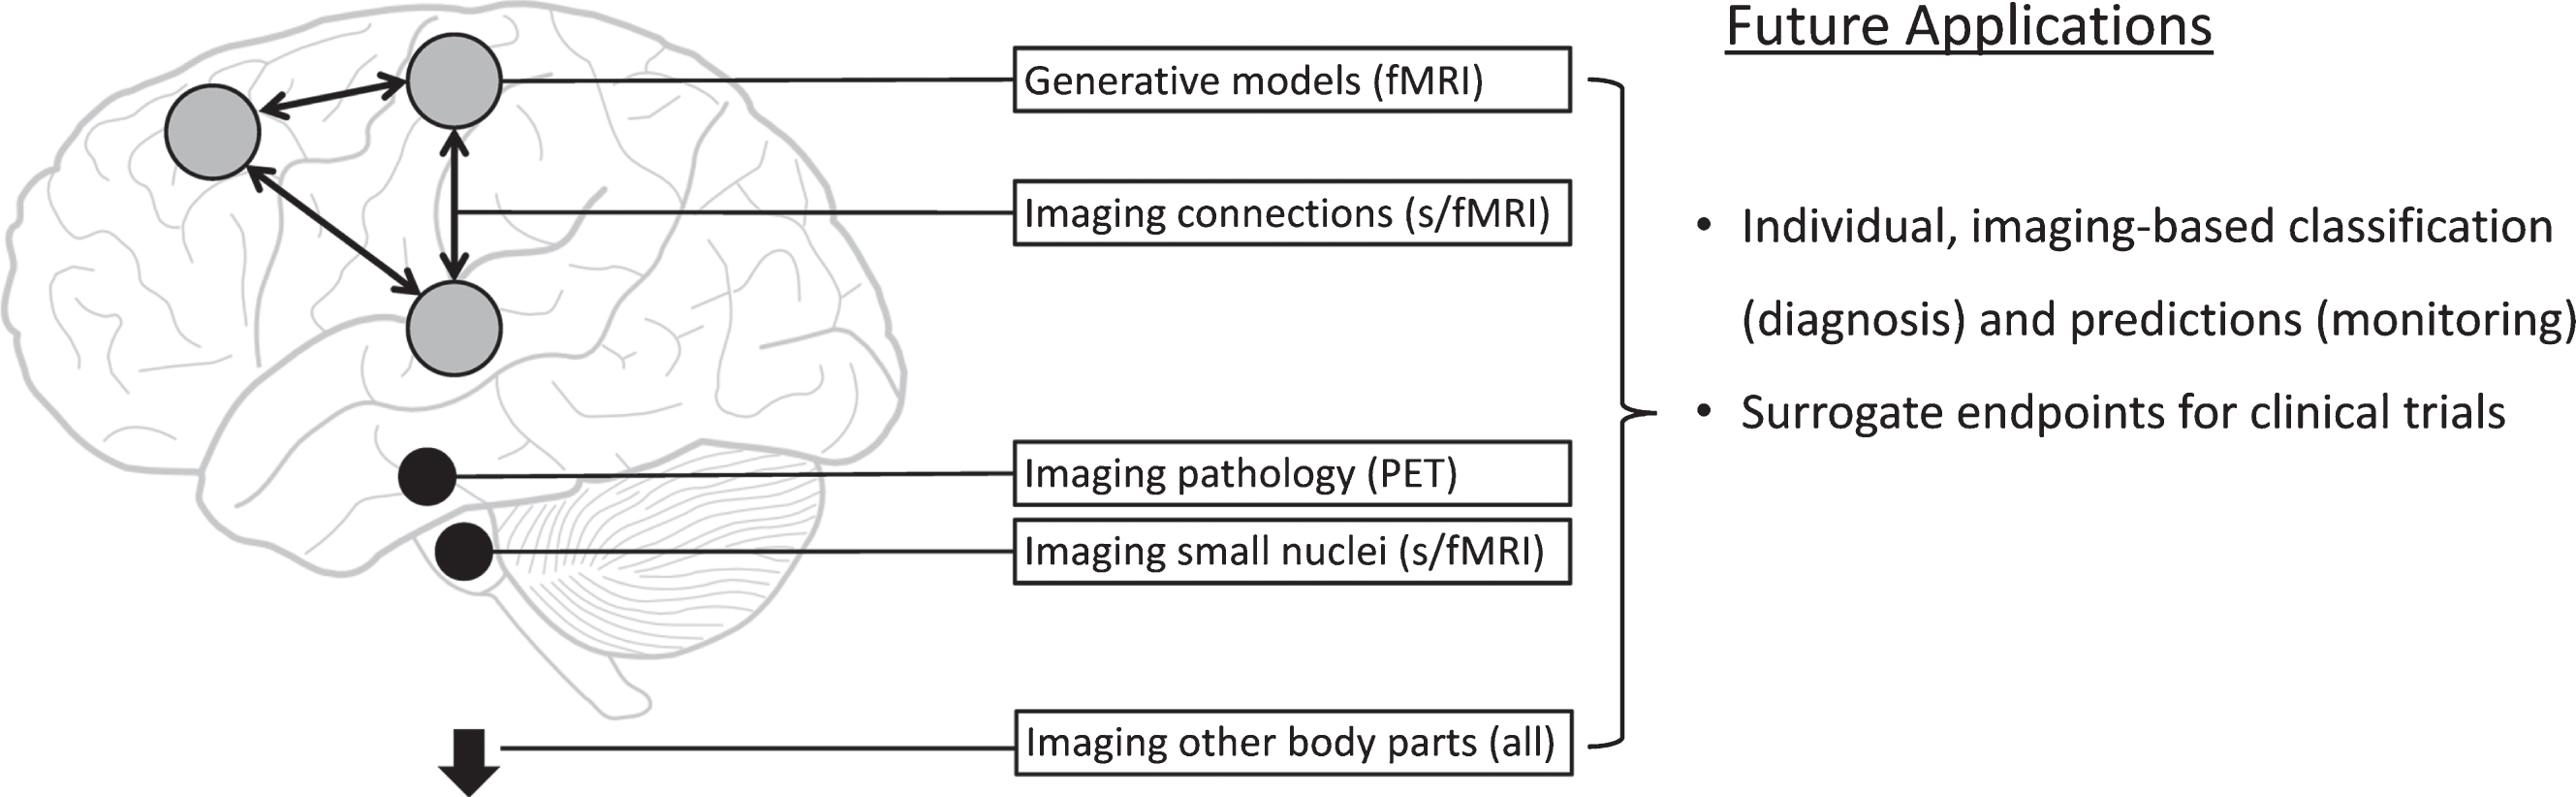 Potential new imaging methods in Parkinson’s disease. This figure schematically represents new approaches for functional magnetic resonance imaging (fMRI), structural MRI, and positron emission tomography (PET) imaging.